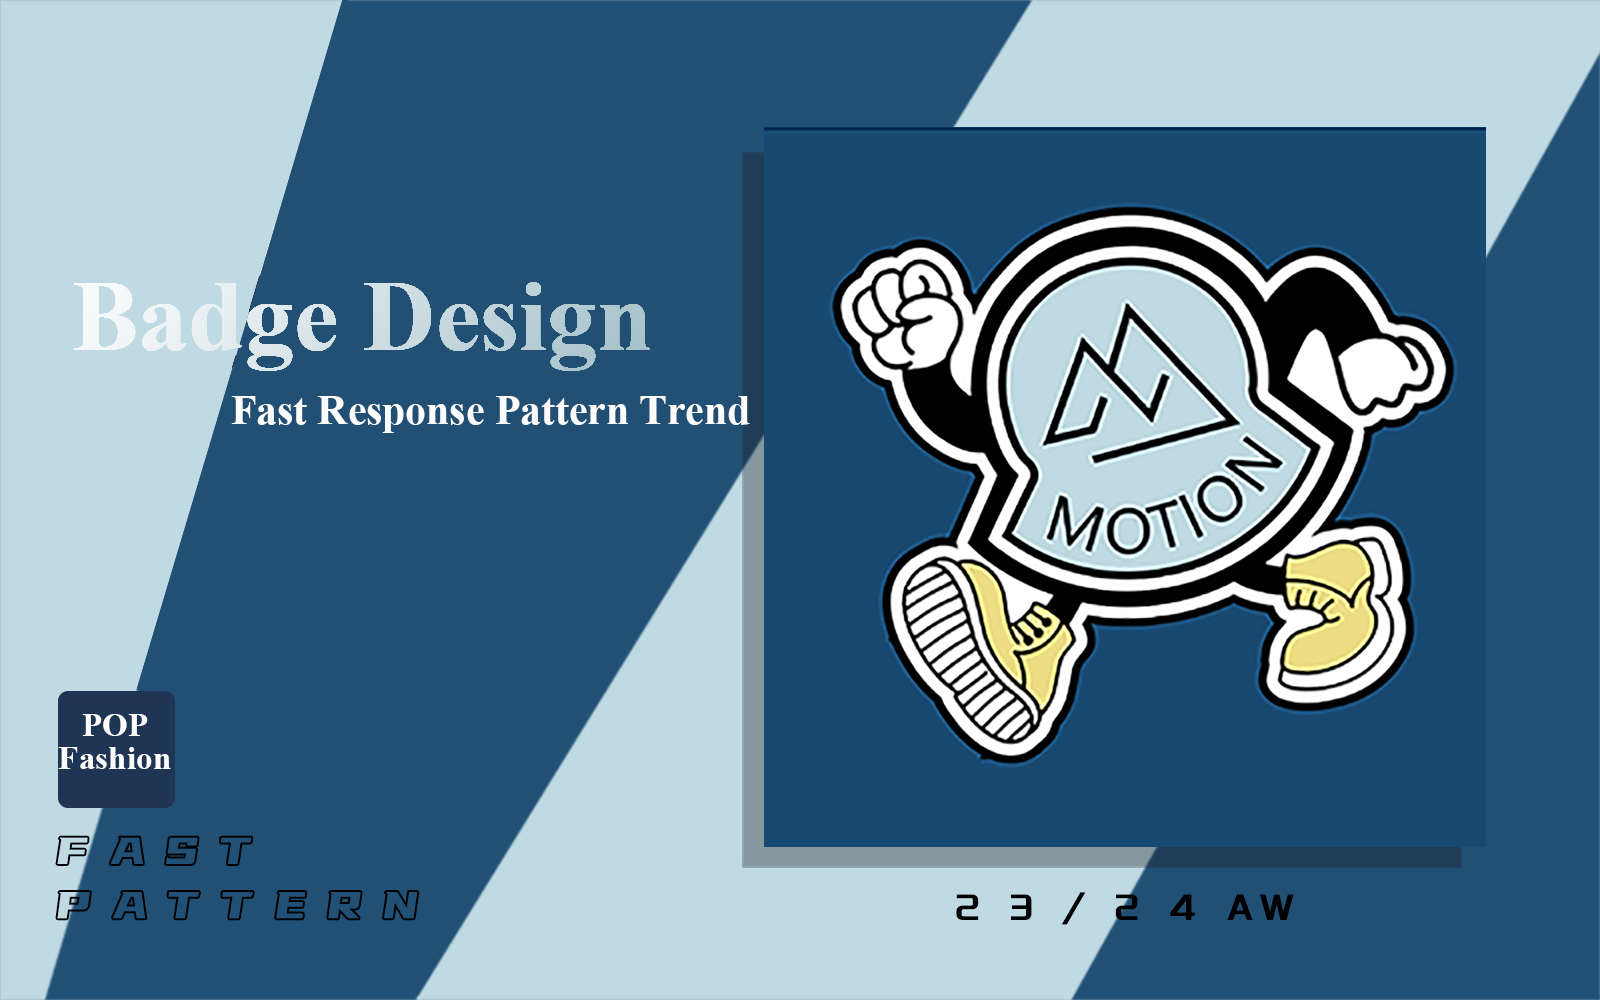 Badge Design -- The Fast-Response Pattern Trend of Menswear